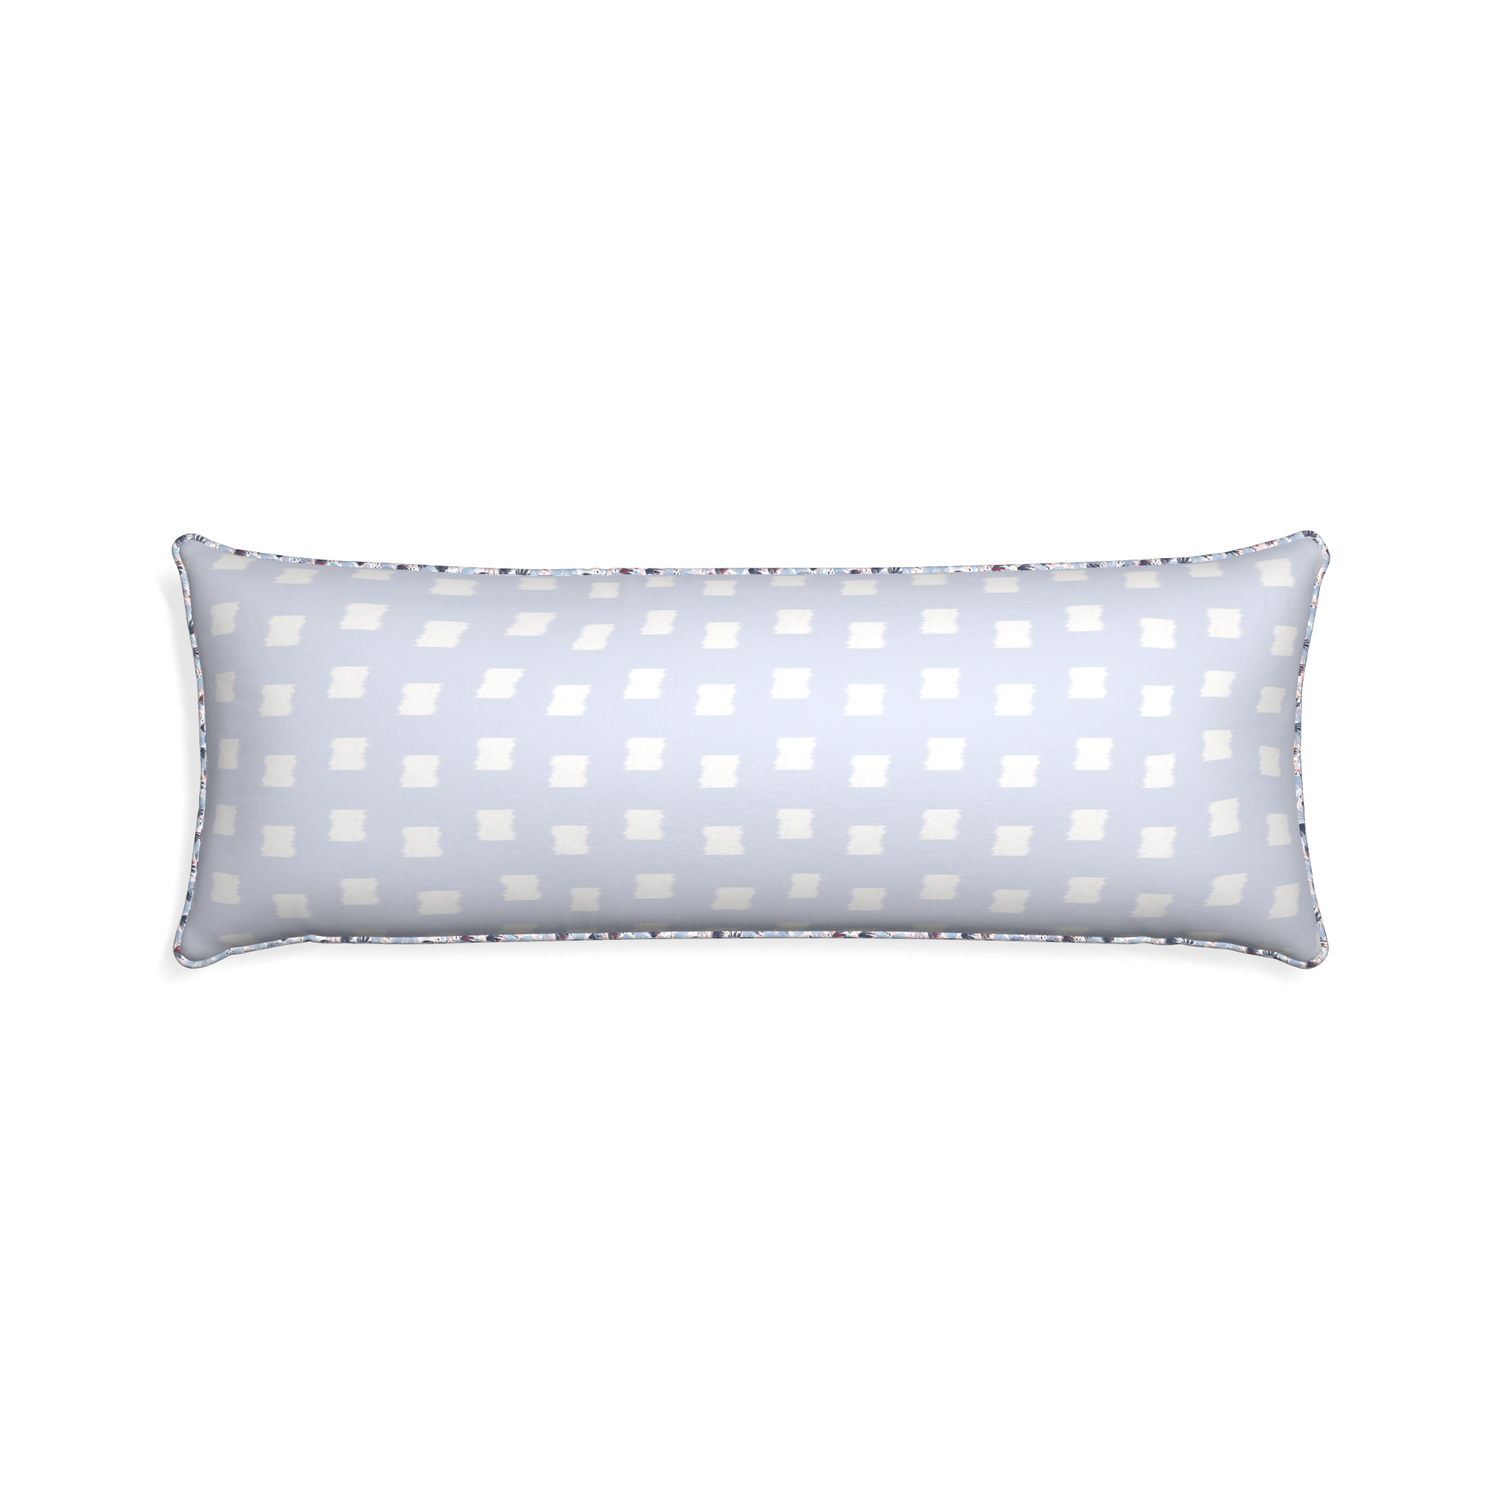 Xl-lumbar denton custom sky blue patternpillow with e piping on white background